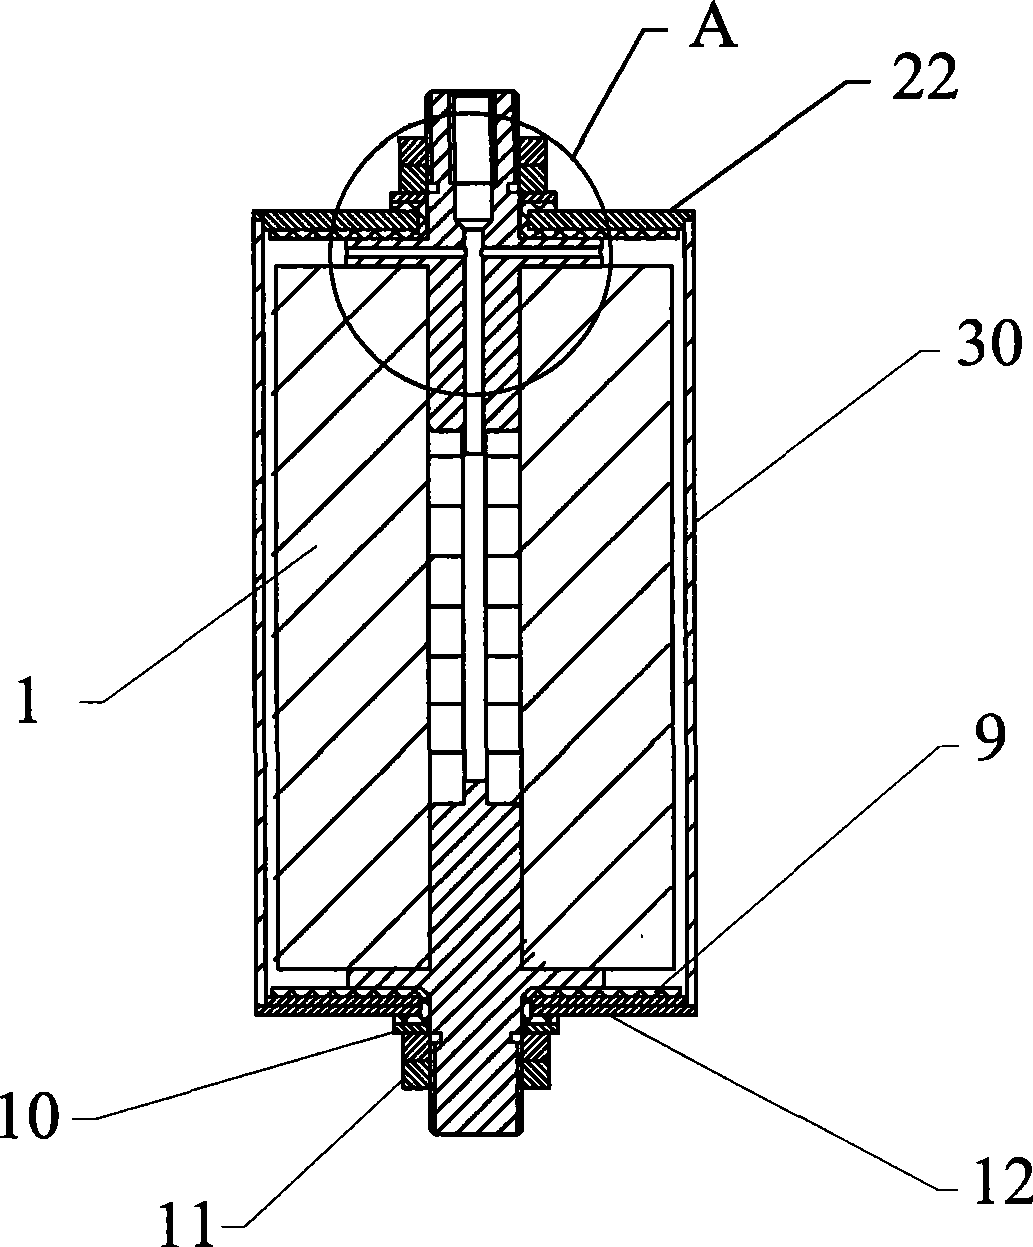 Core of cylindrical battery and method for assembling the core into the battery case